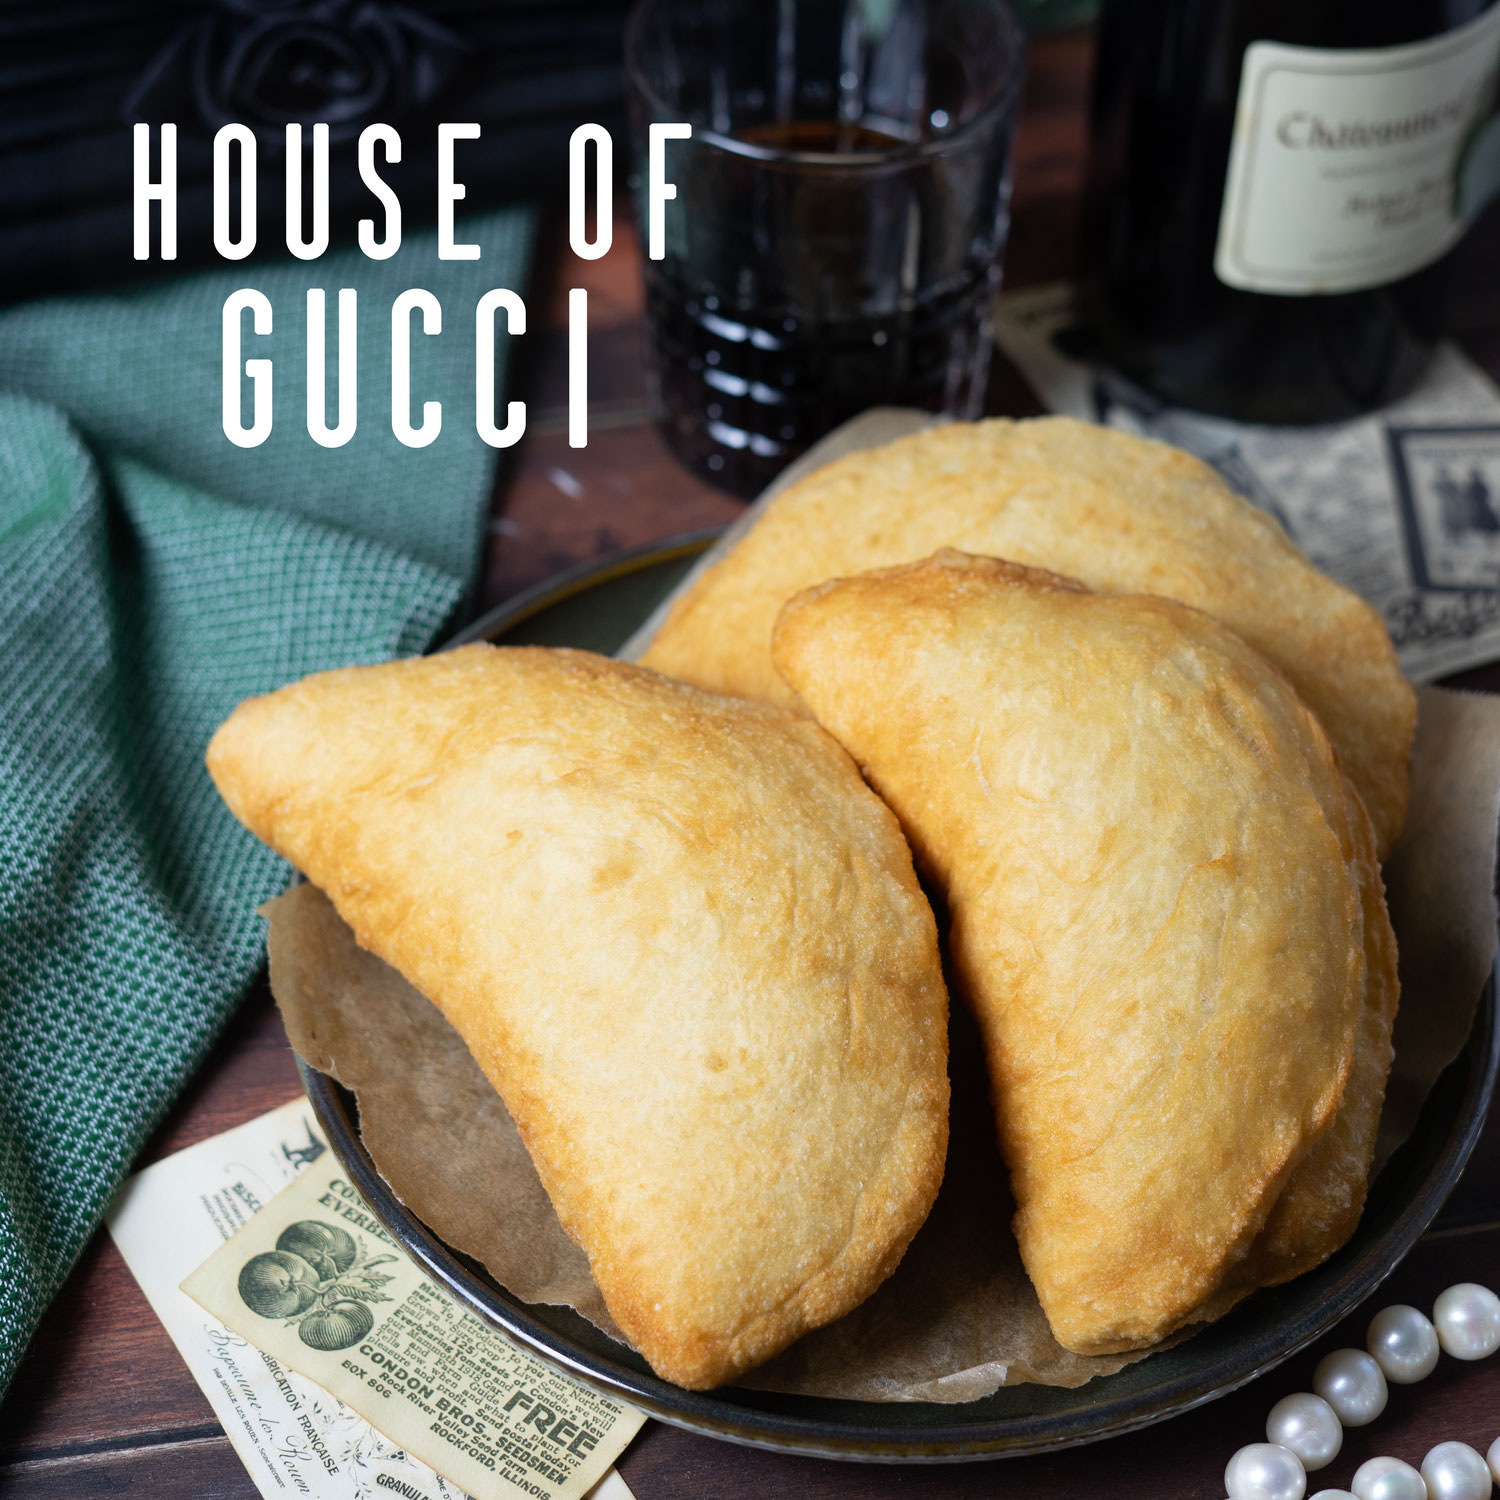 Calzone Fritto aus dem Film House of Gucci